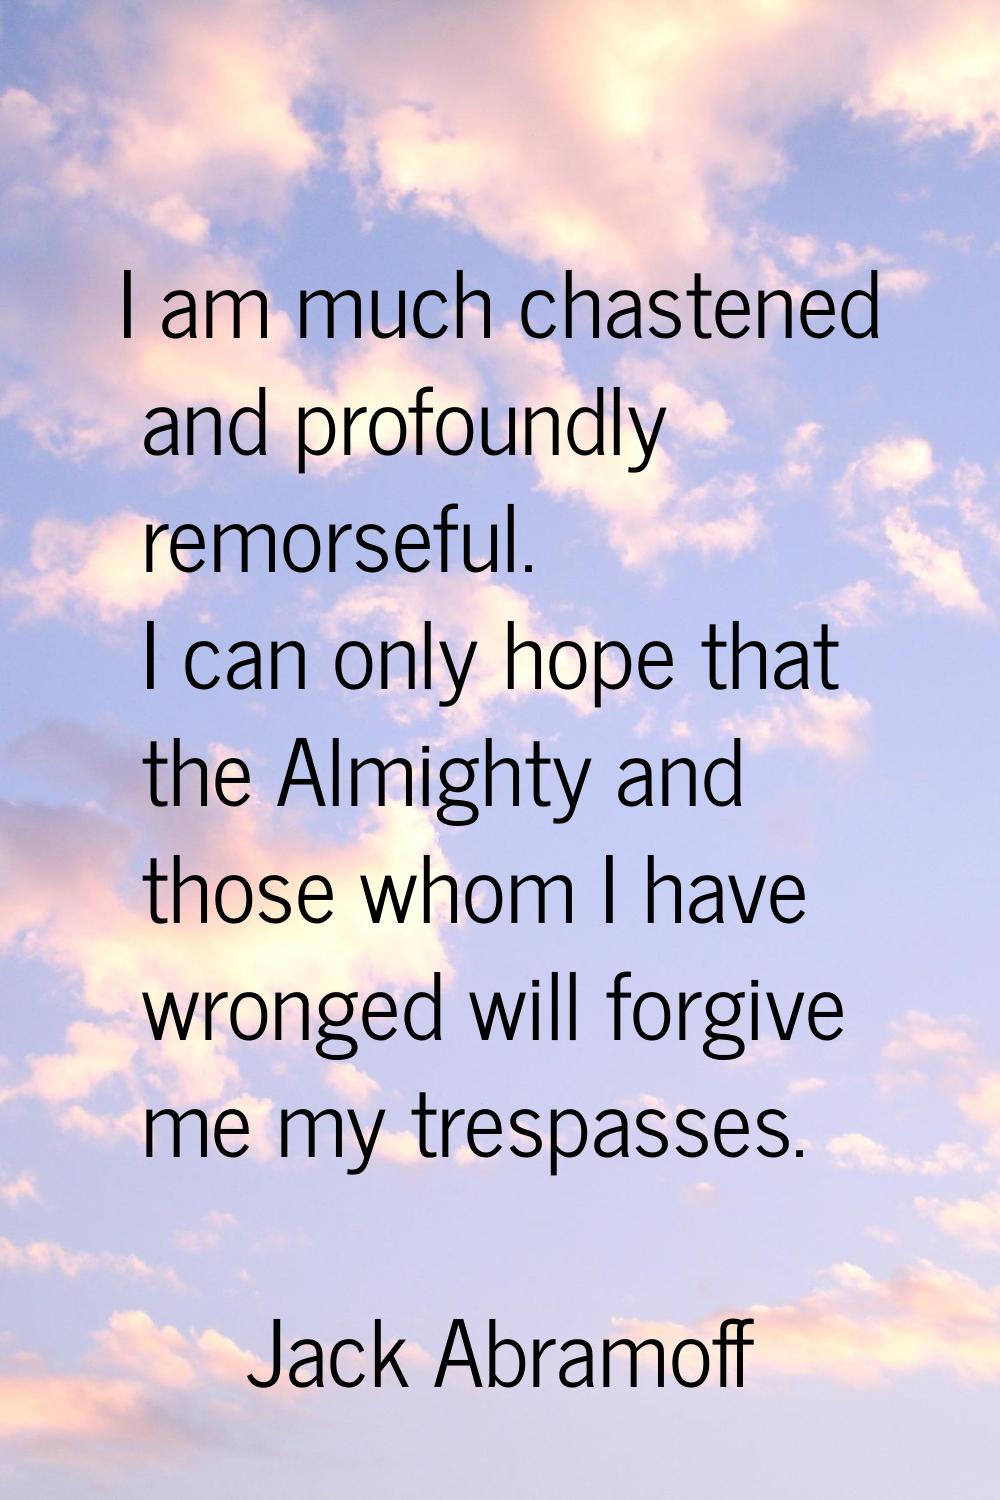 I am much chastened and profoundly remorseful. I can only hope that the Almighty and those whom I h